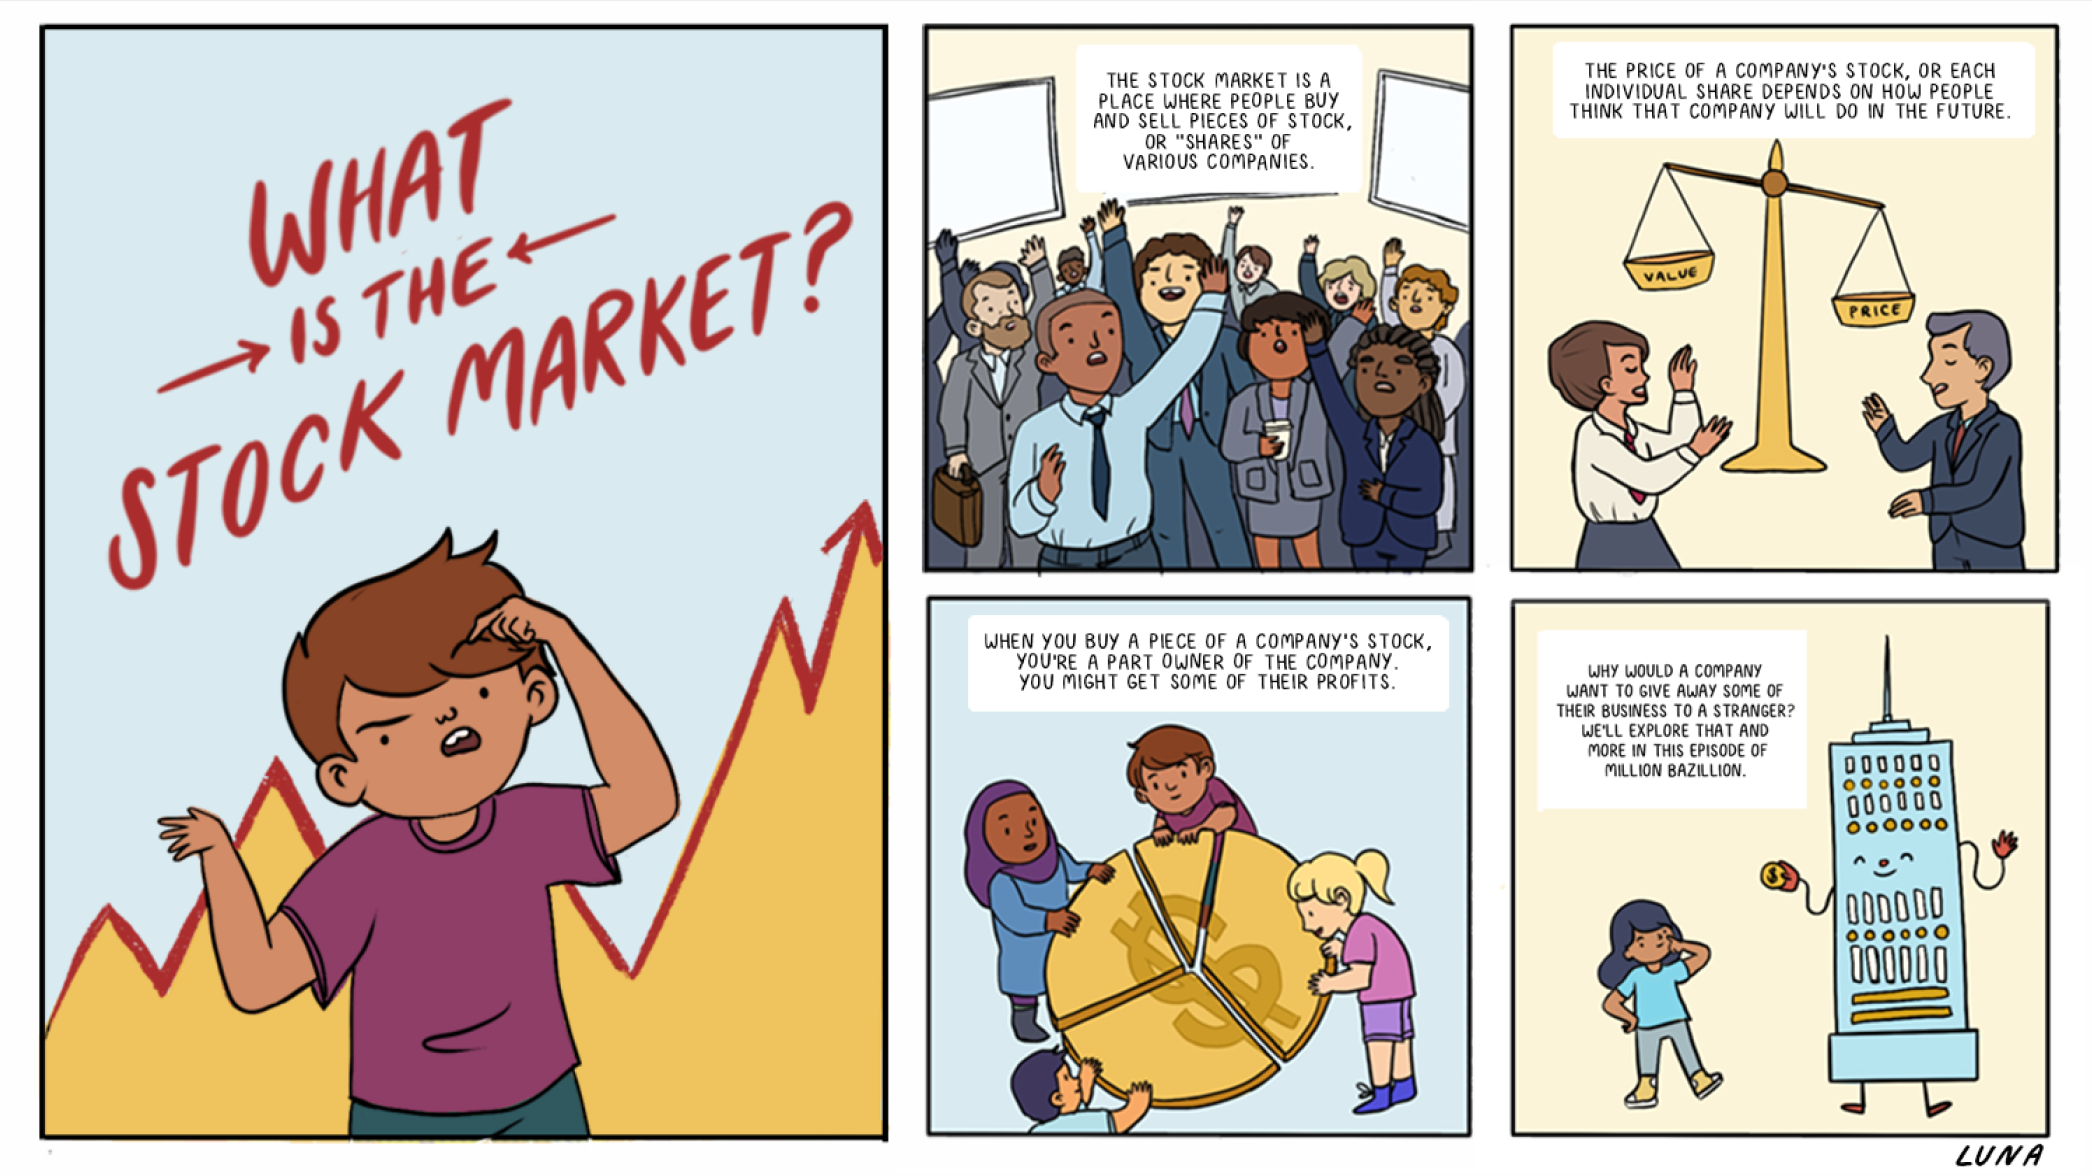 "What Is the Stock Market" comic